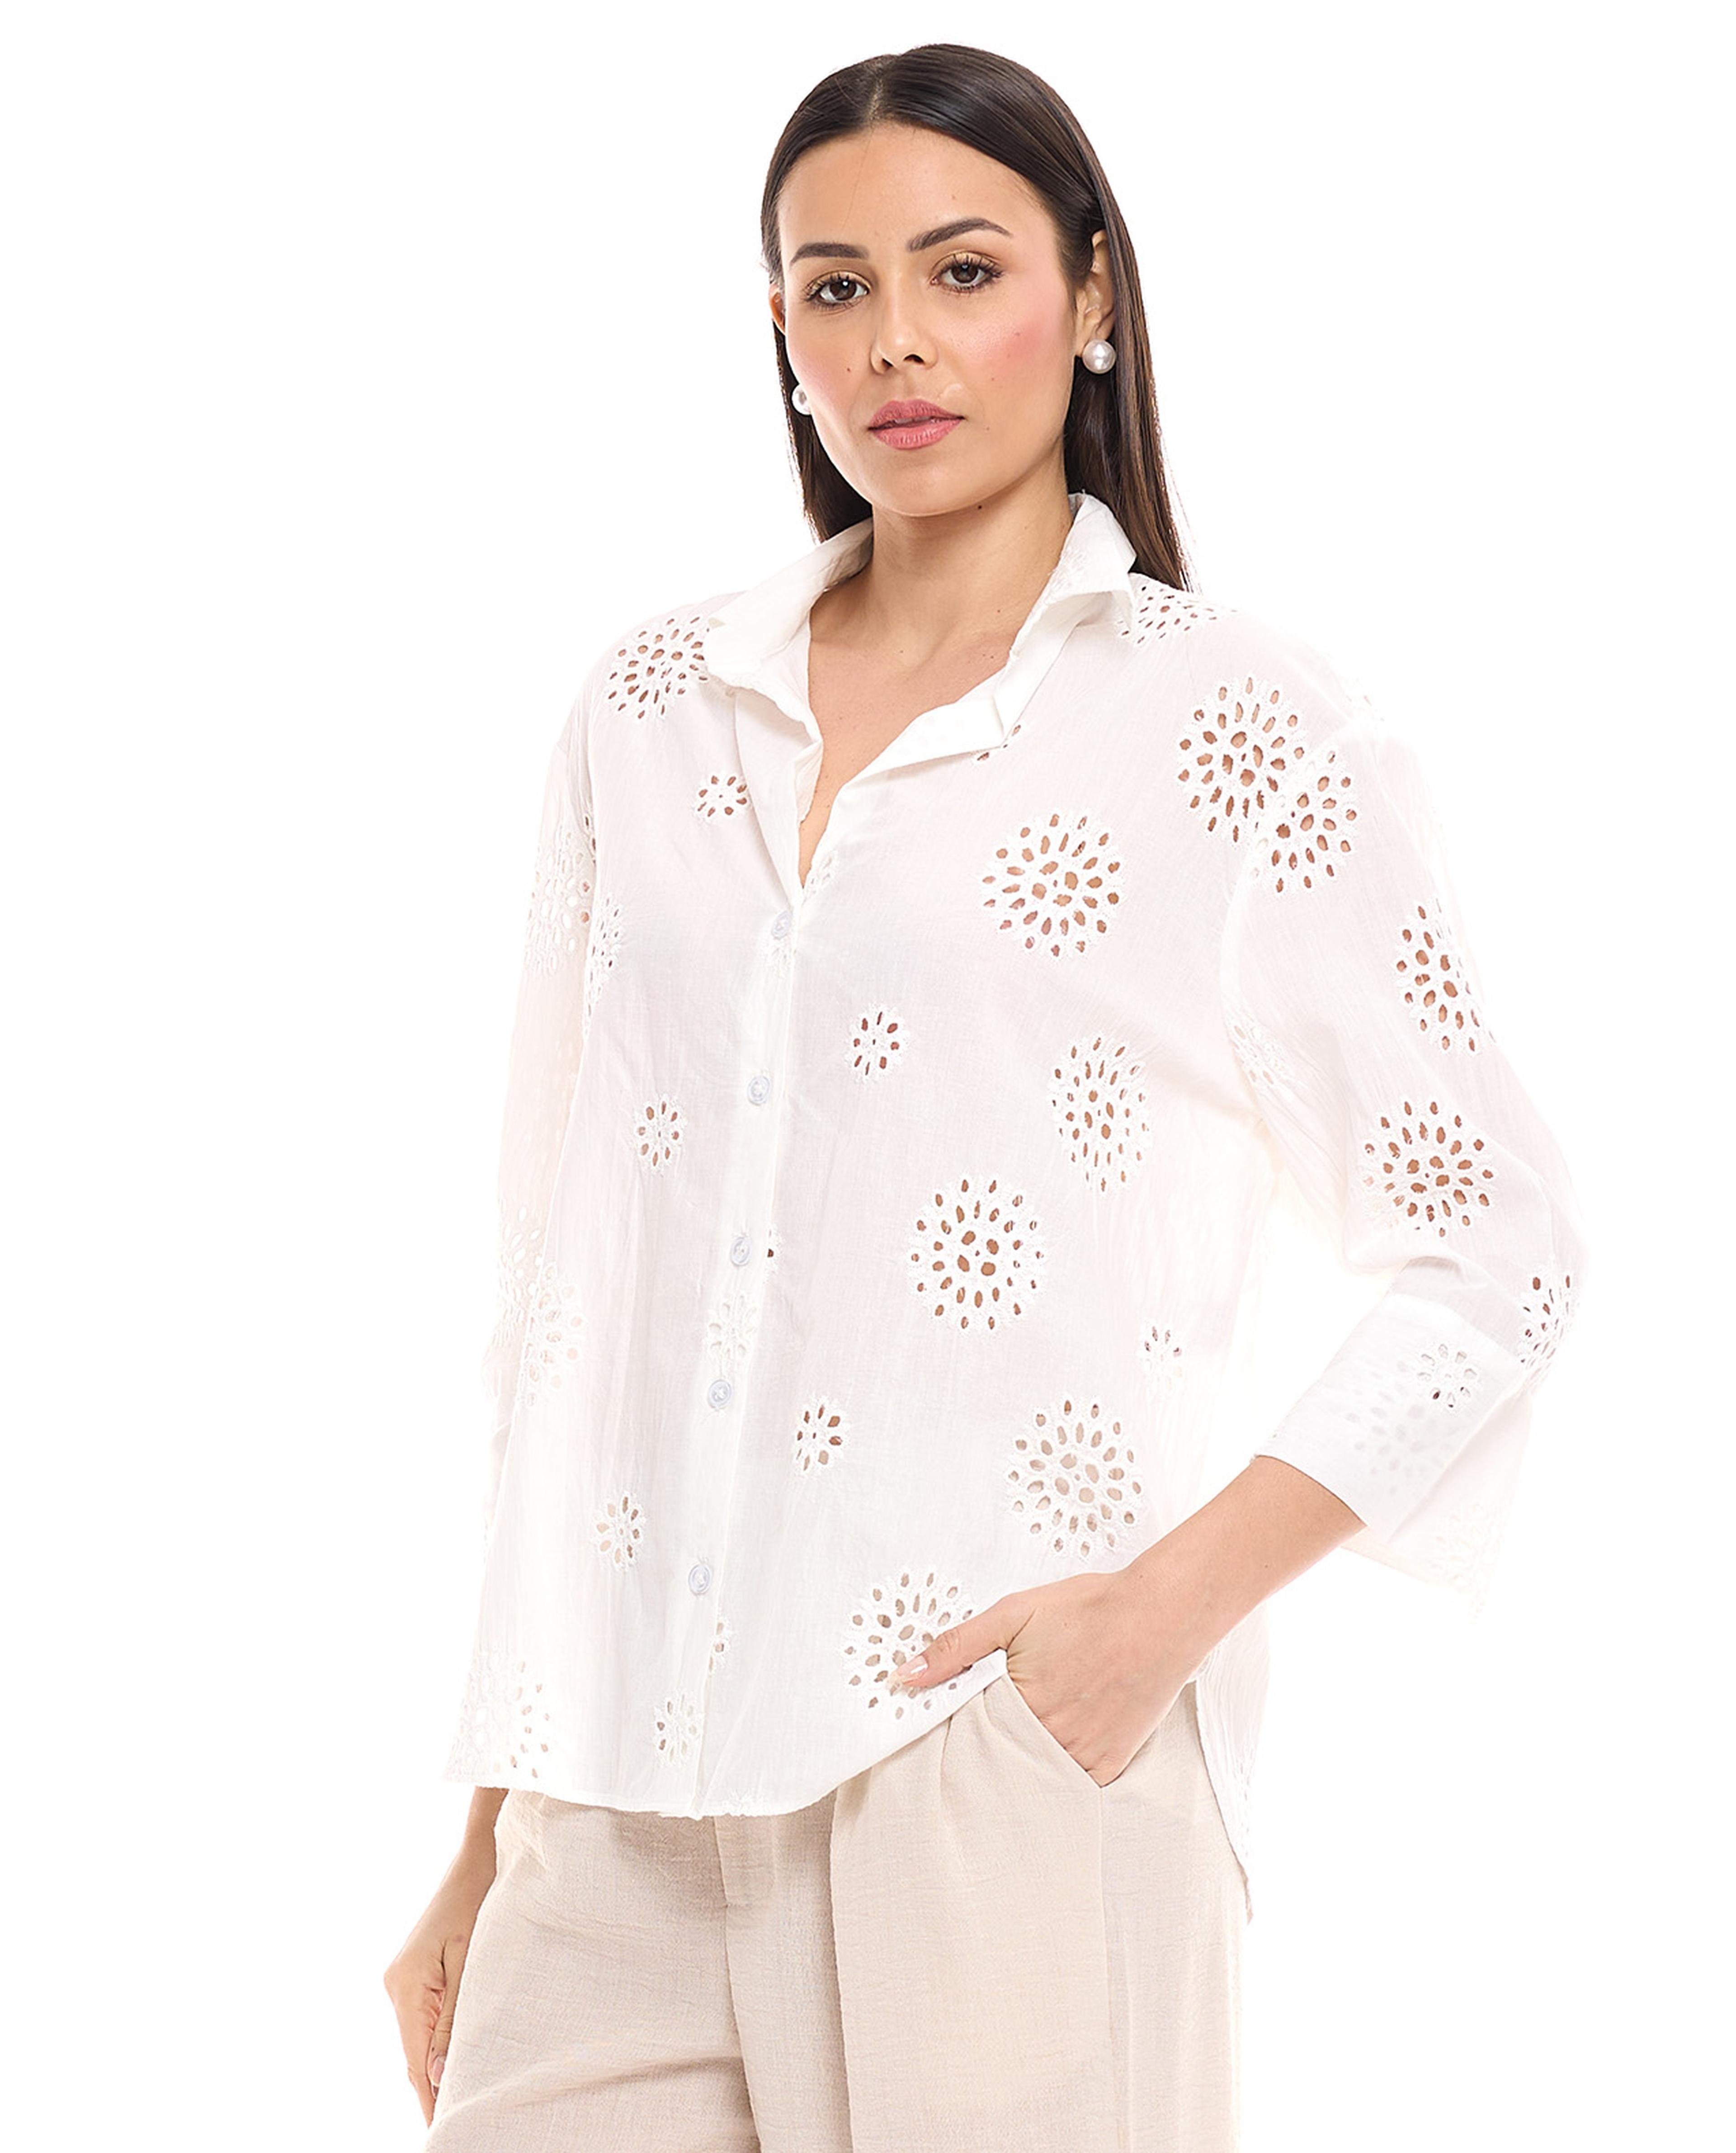 Openwork Shirt with Spread Collar and 3/4 Sleeves